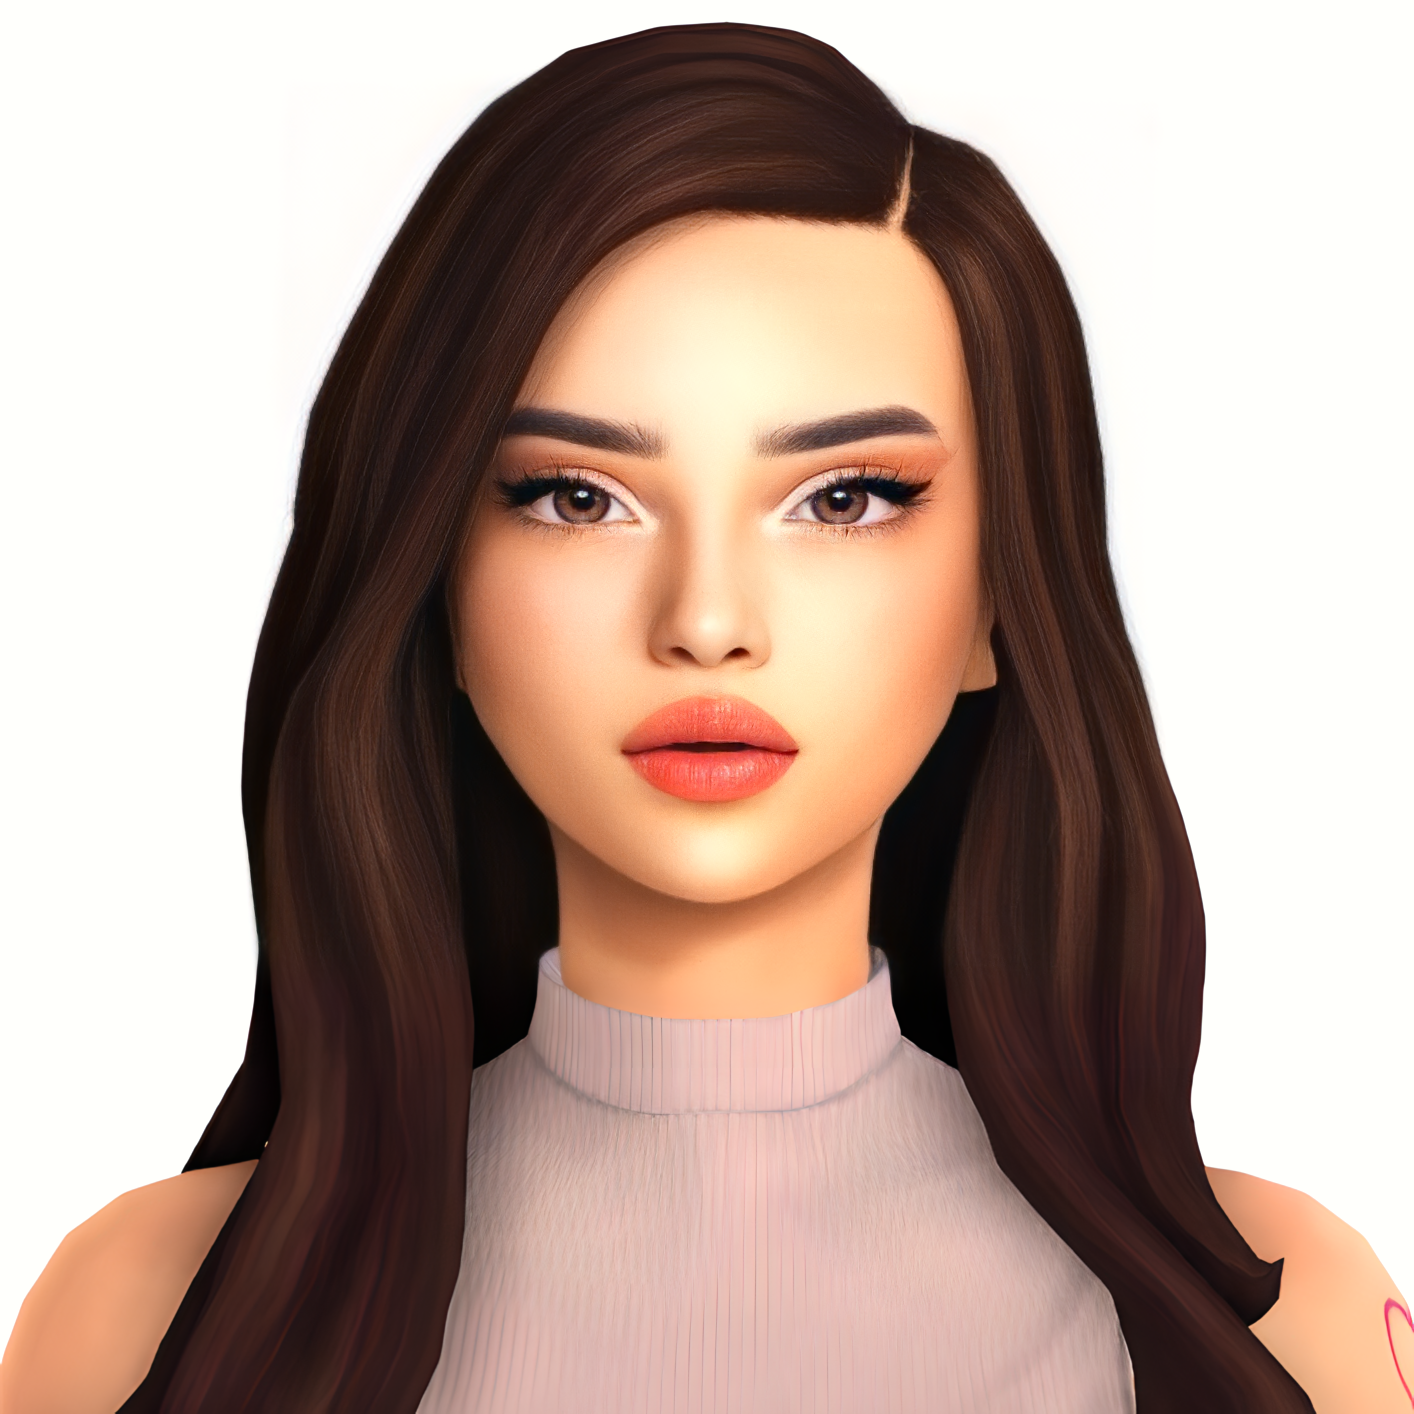 Chasity Staley - The Sims 4 Sims / Households - CurseForge